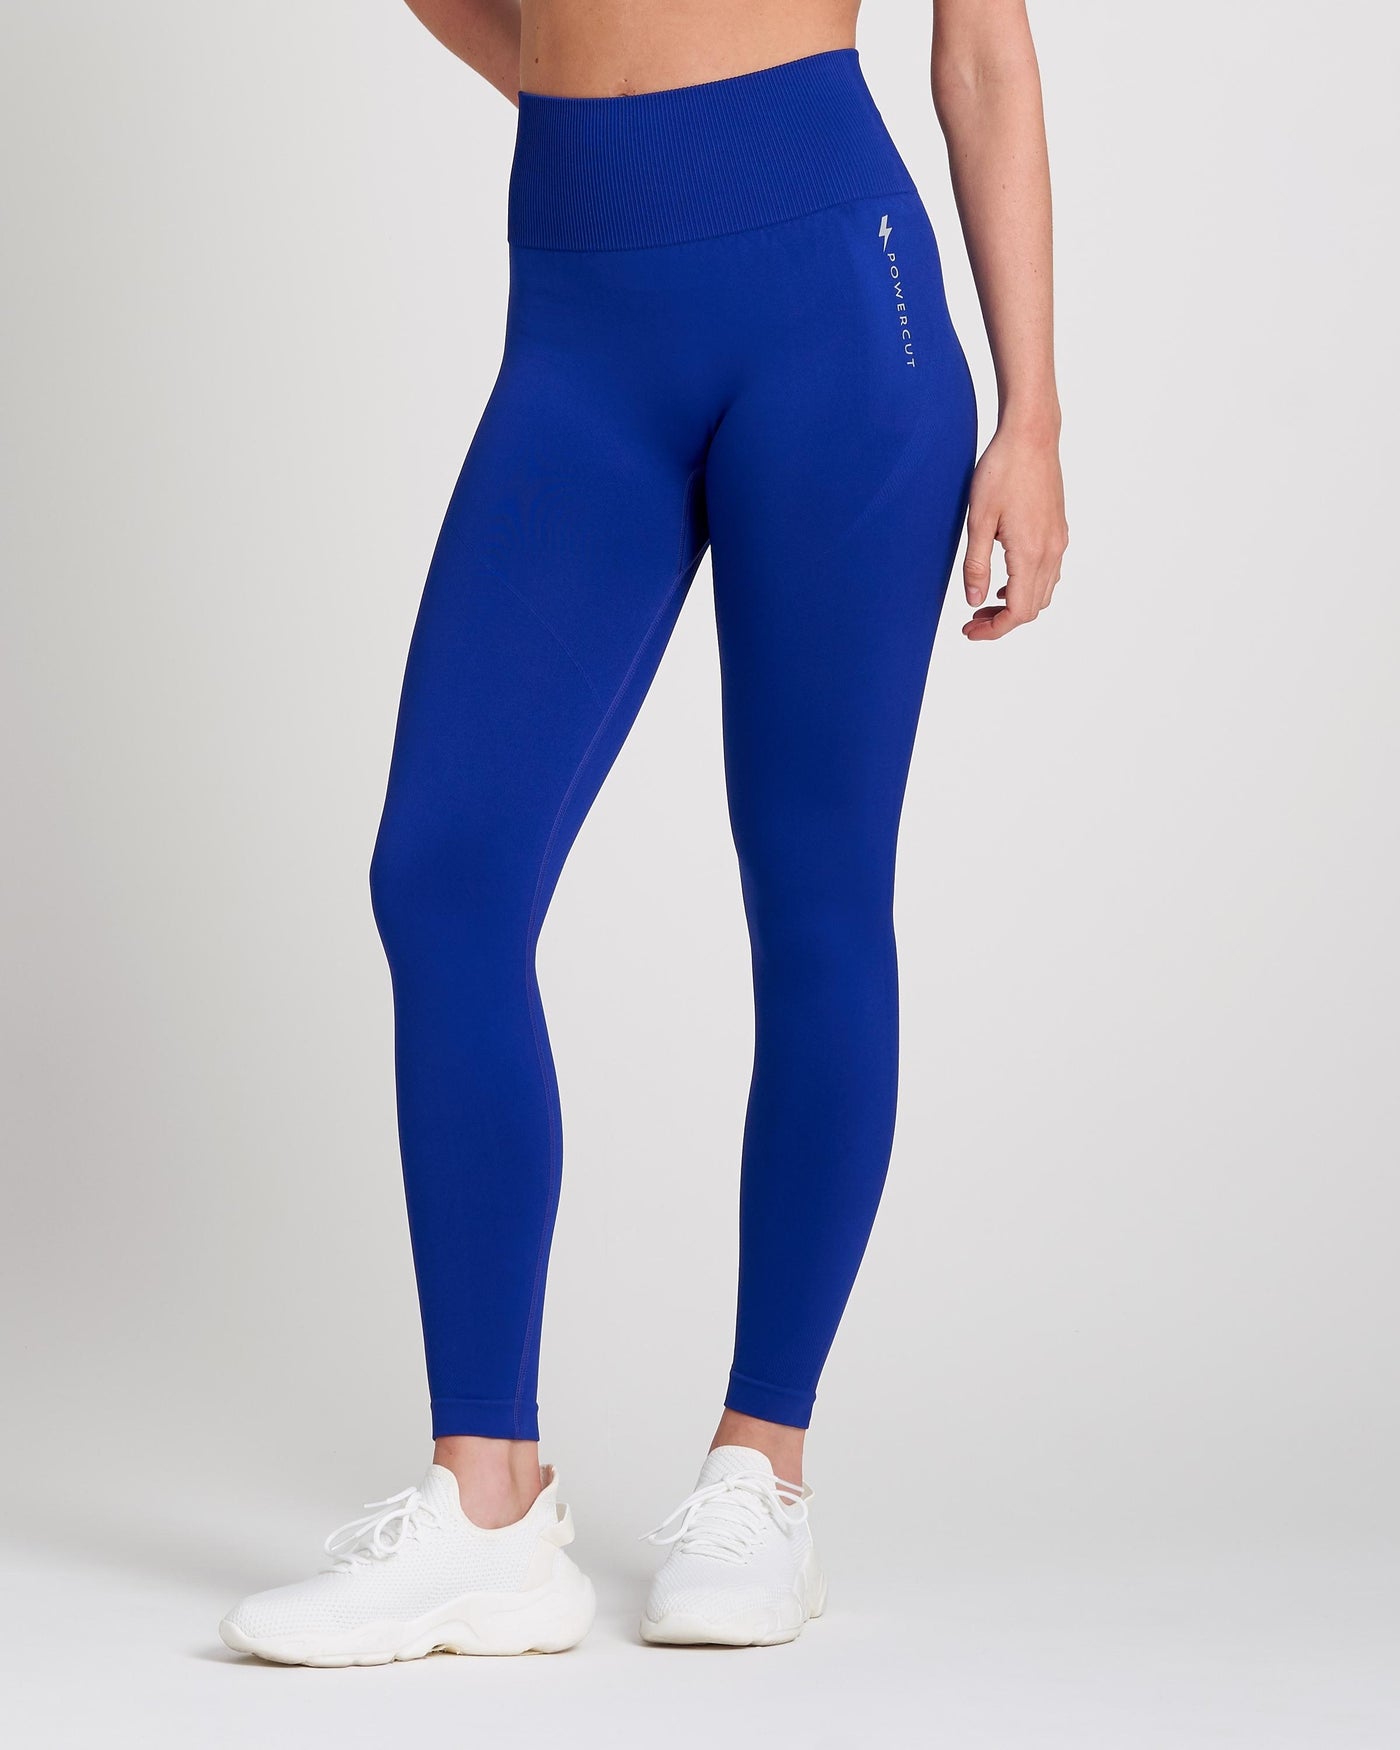 SOLID Electric Blue Seamless Leggings